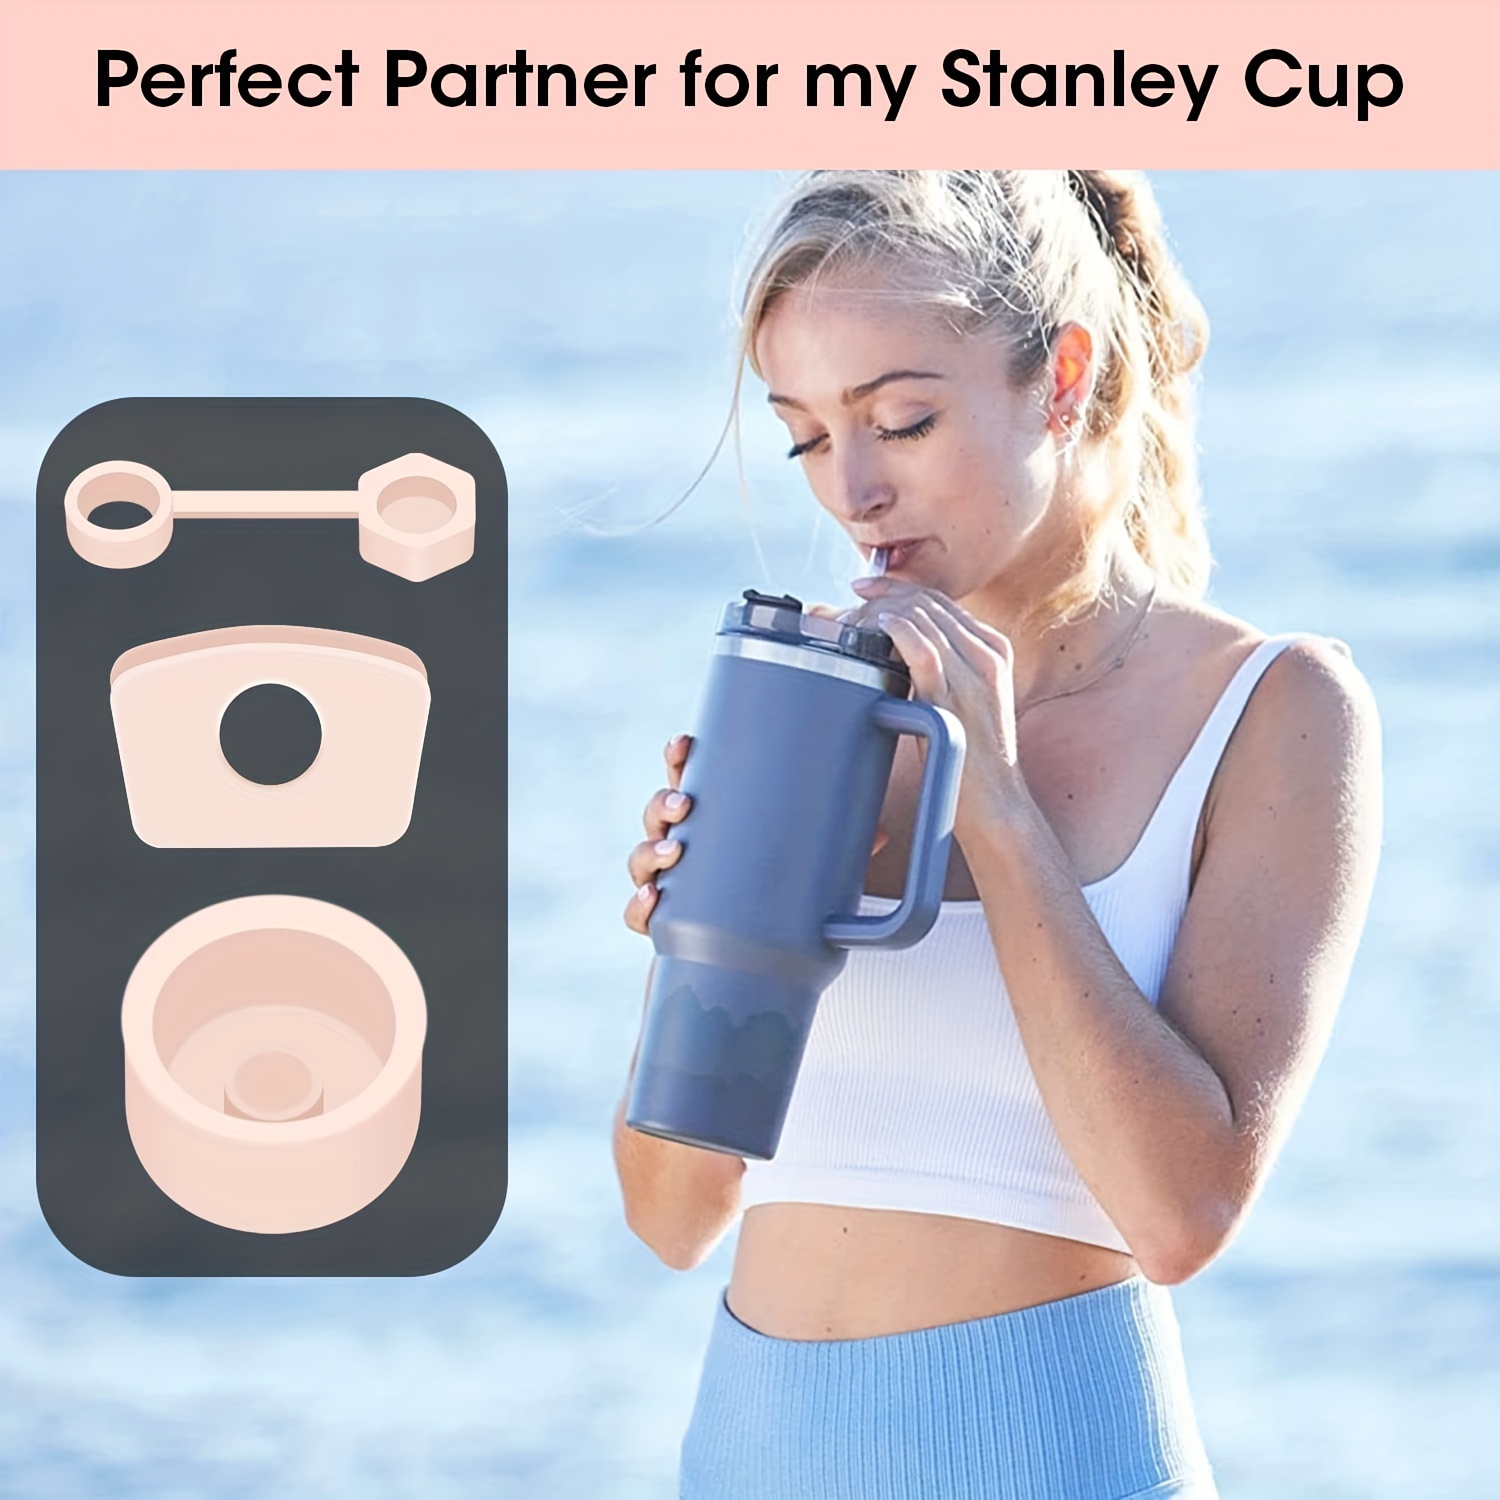 Stanley Accessory Straw Cap Stanley Topper Drink Cover Stanley